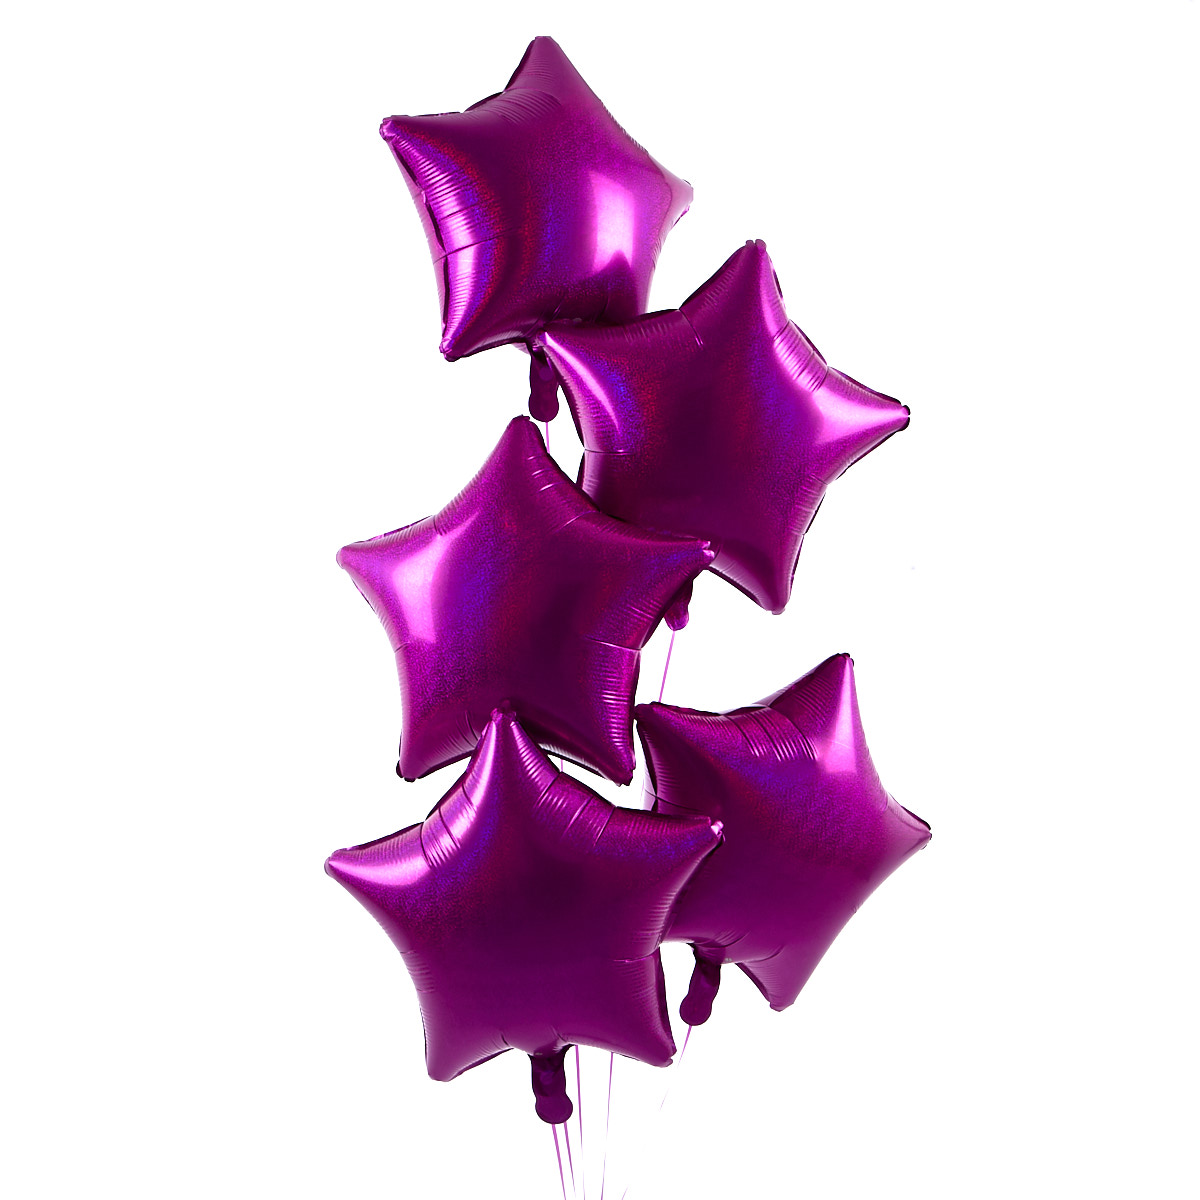 5 Magenta Stars Balloon Bouquet - DELIVERED INFLATED!